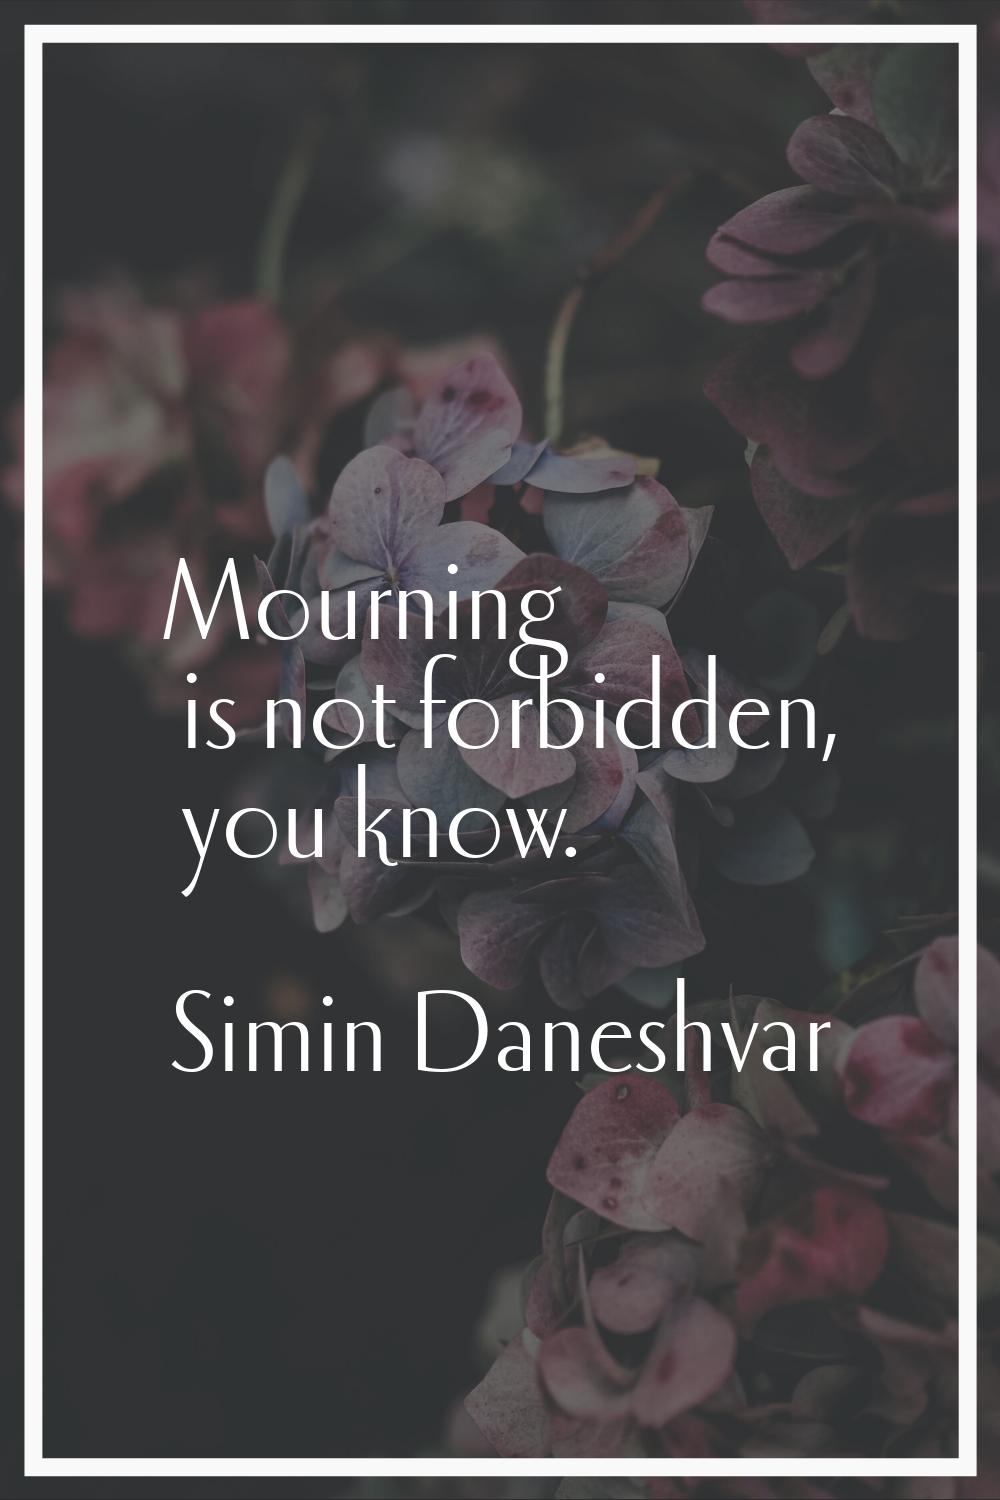 Mourning is not forbidden, you know.